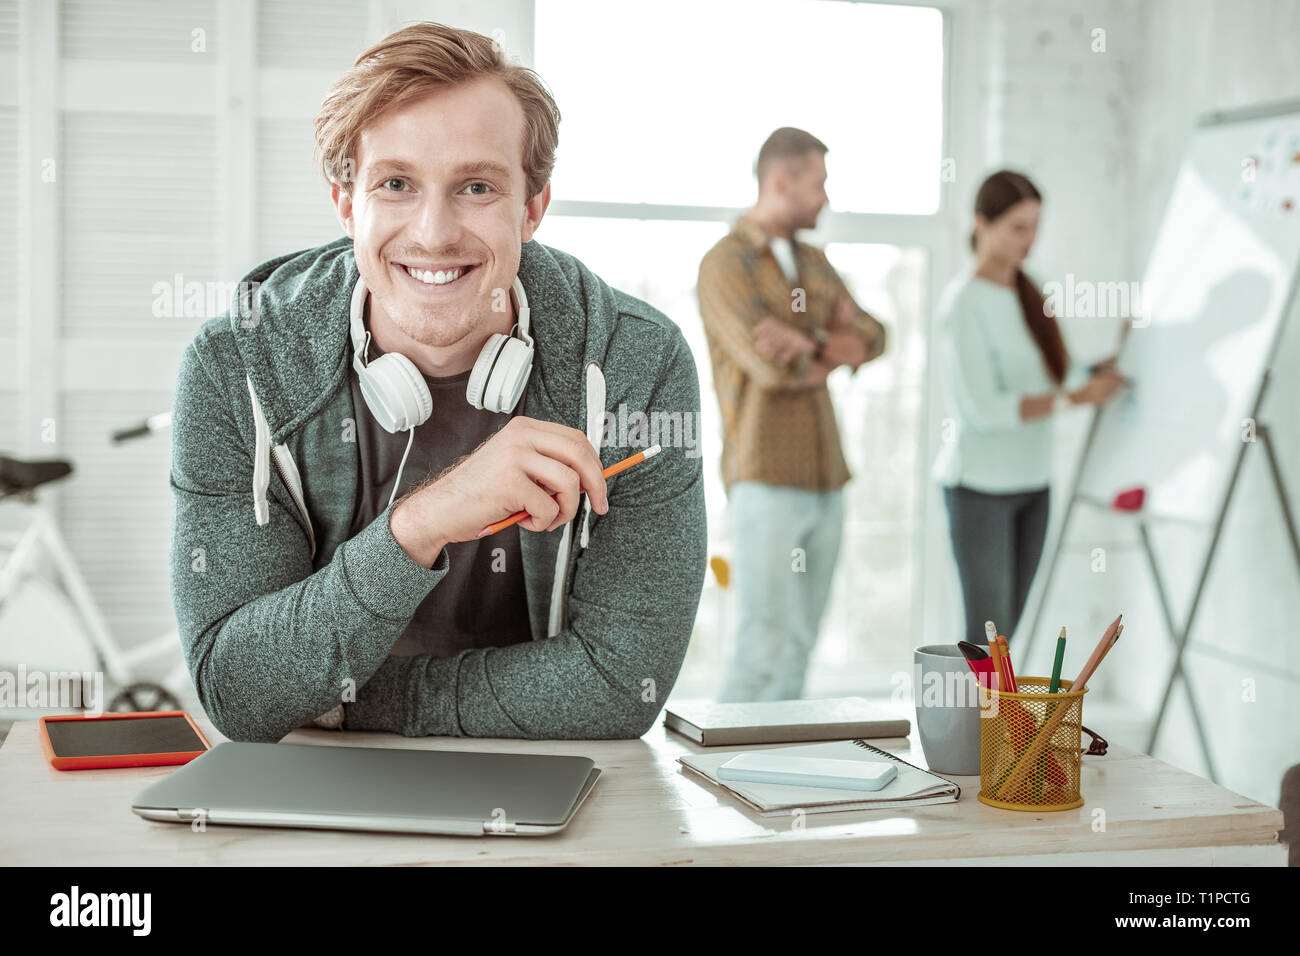 Happy handsome man holding a pencil in his hand Stock Photo